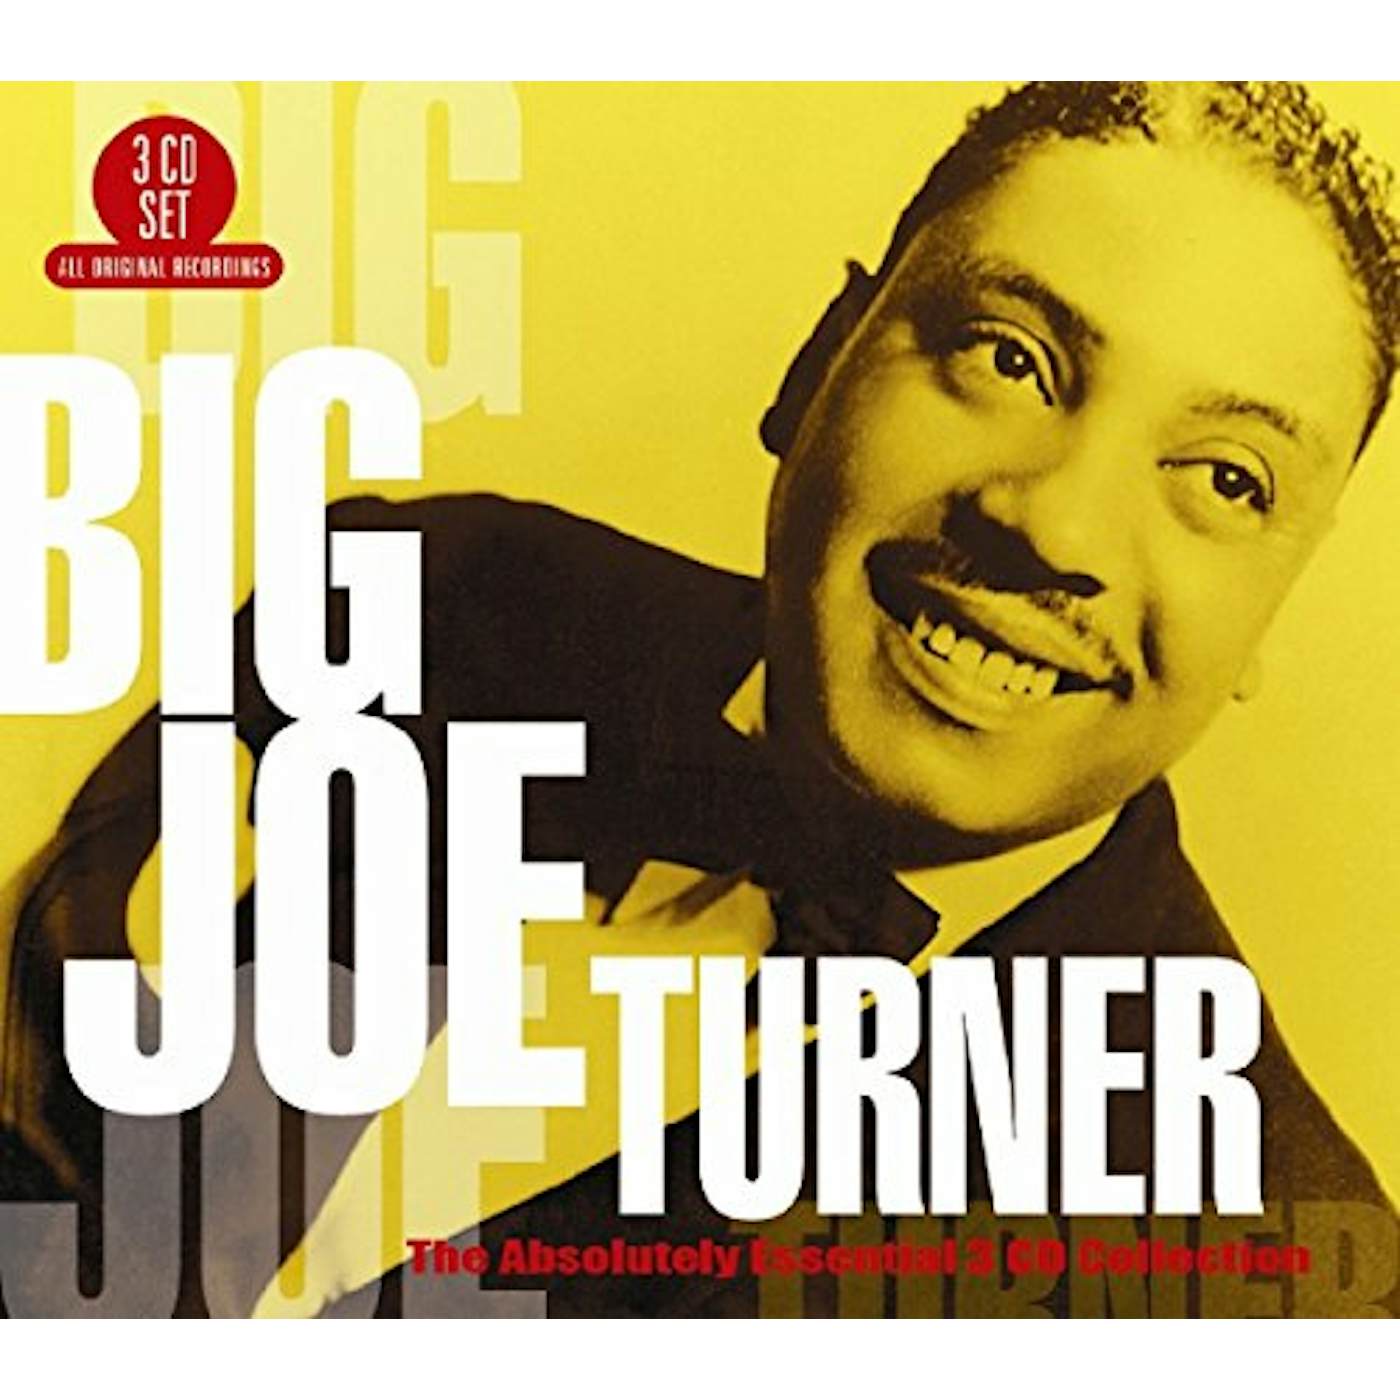 Big Joe Turner ABSOLUTELY ESSENTIAL COLLECTION CD